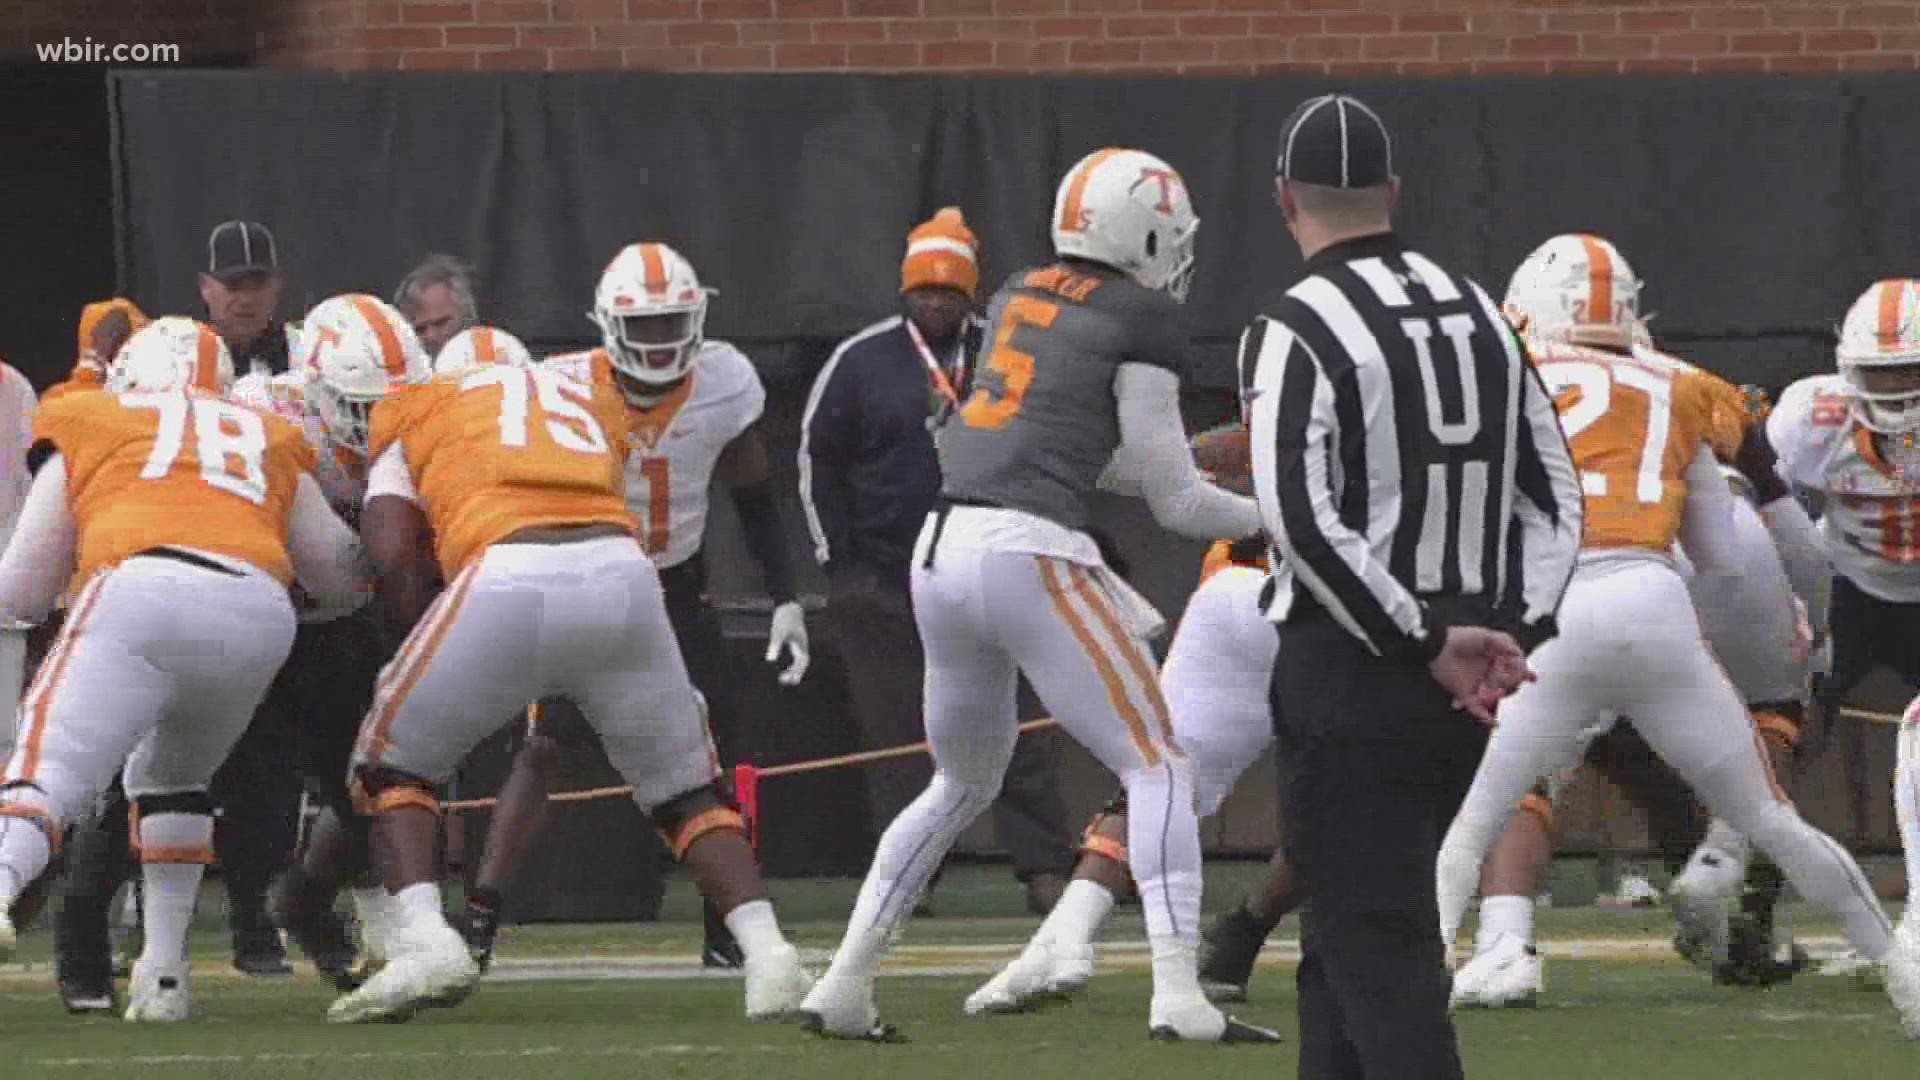 Tennessee quarterback Hendon Hooker led the Vols down the field on the opening drive and capped it off with a short touchdown pass to tight-end Jacob Warren.